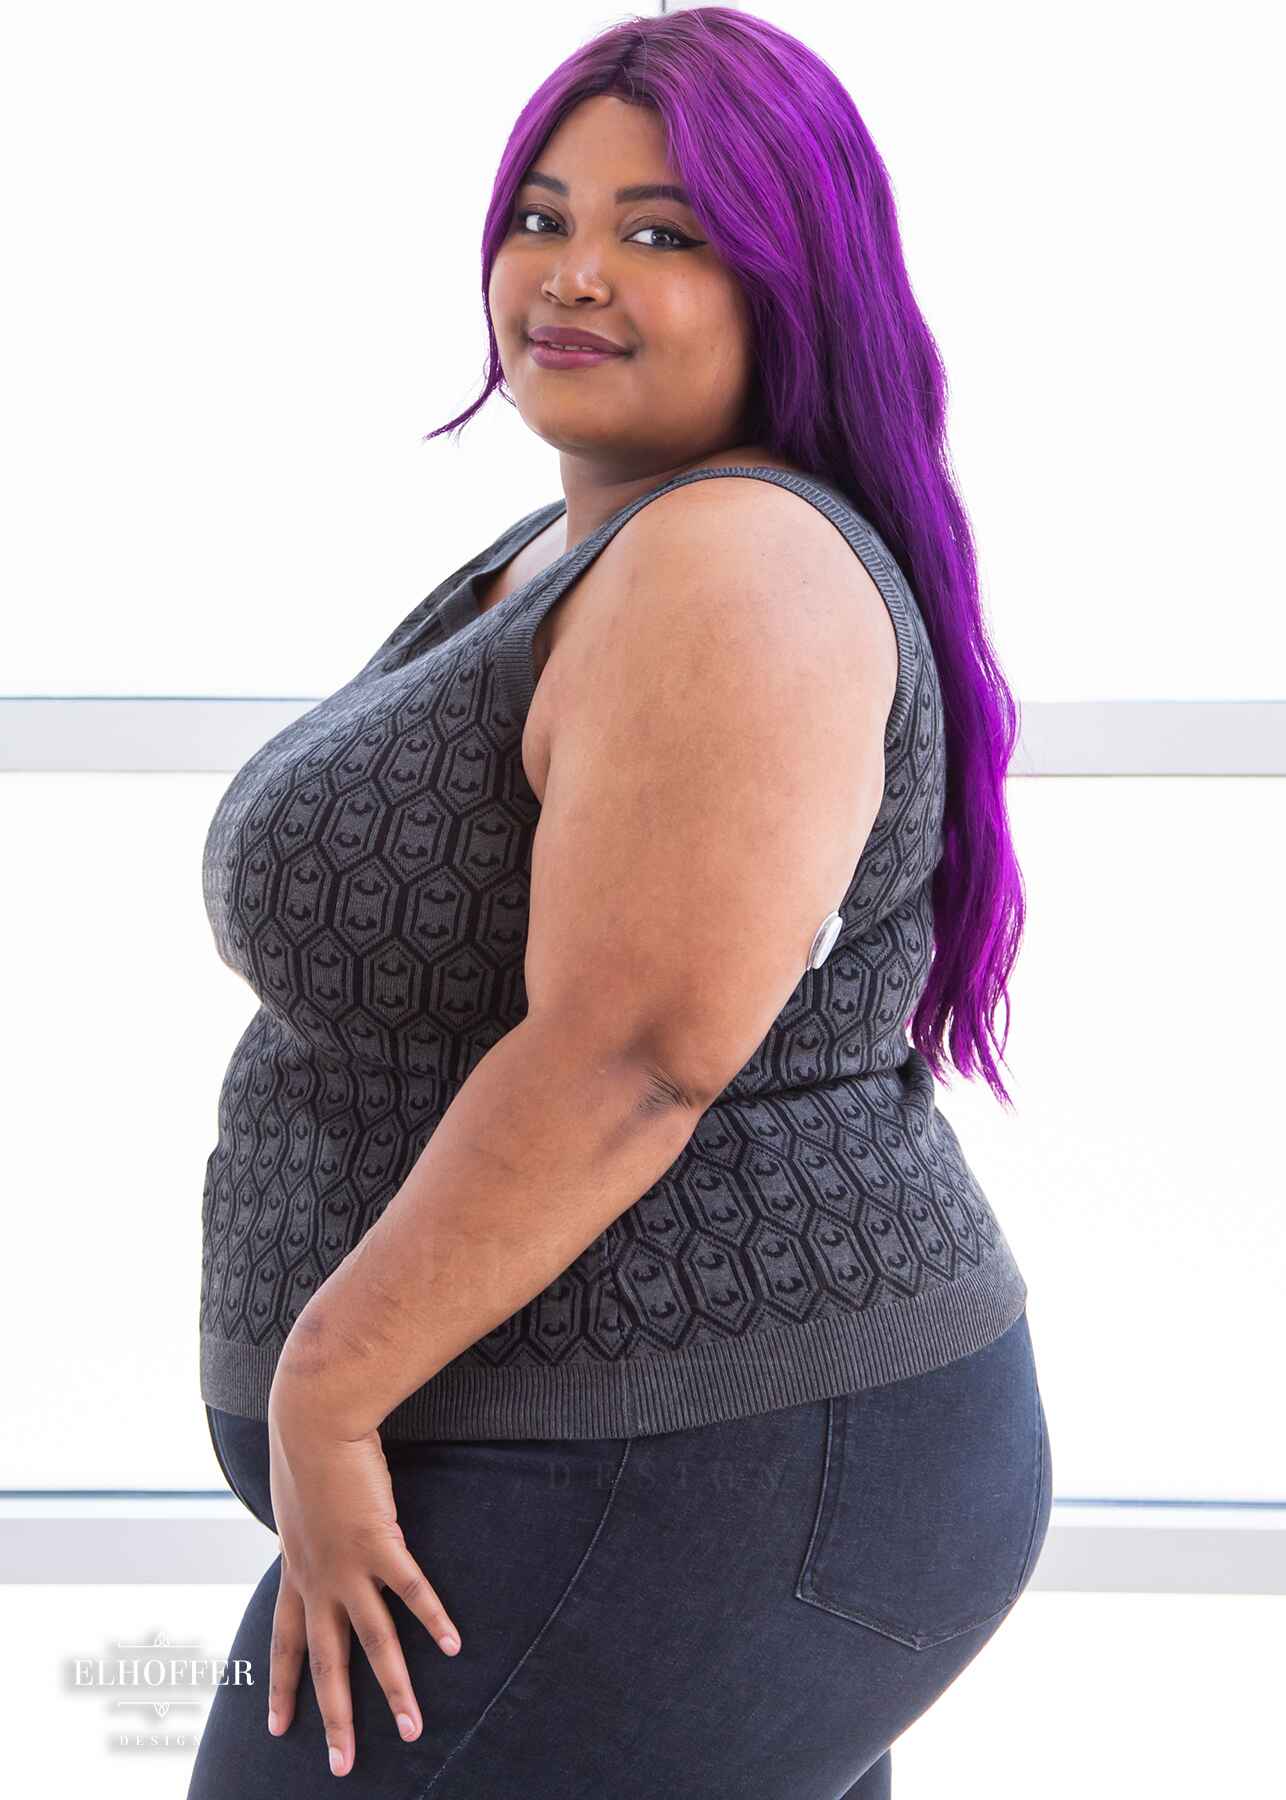 A side view of Jade, a light brown skinned 2xl model with long wavy purple hair, wearing a knit sleeveless top with a boatneck and an armor plated design